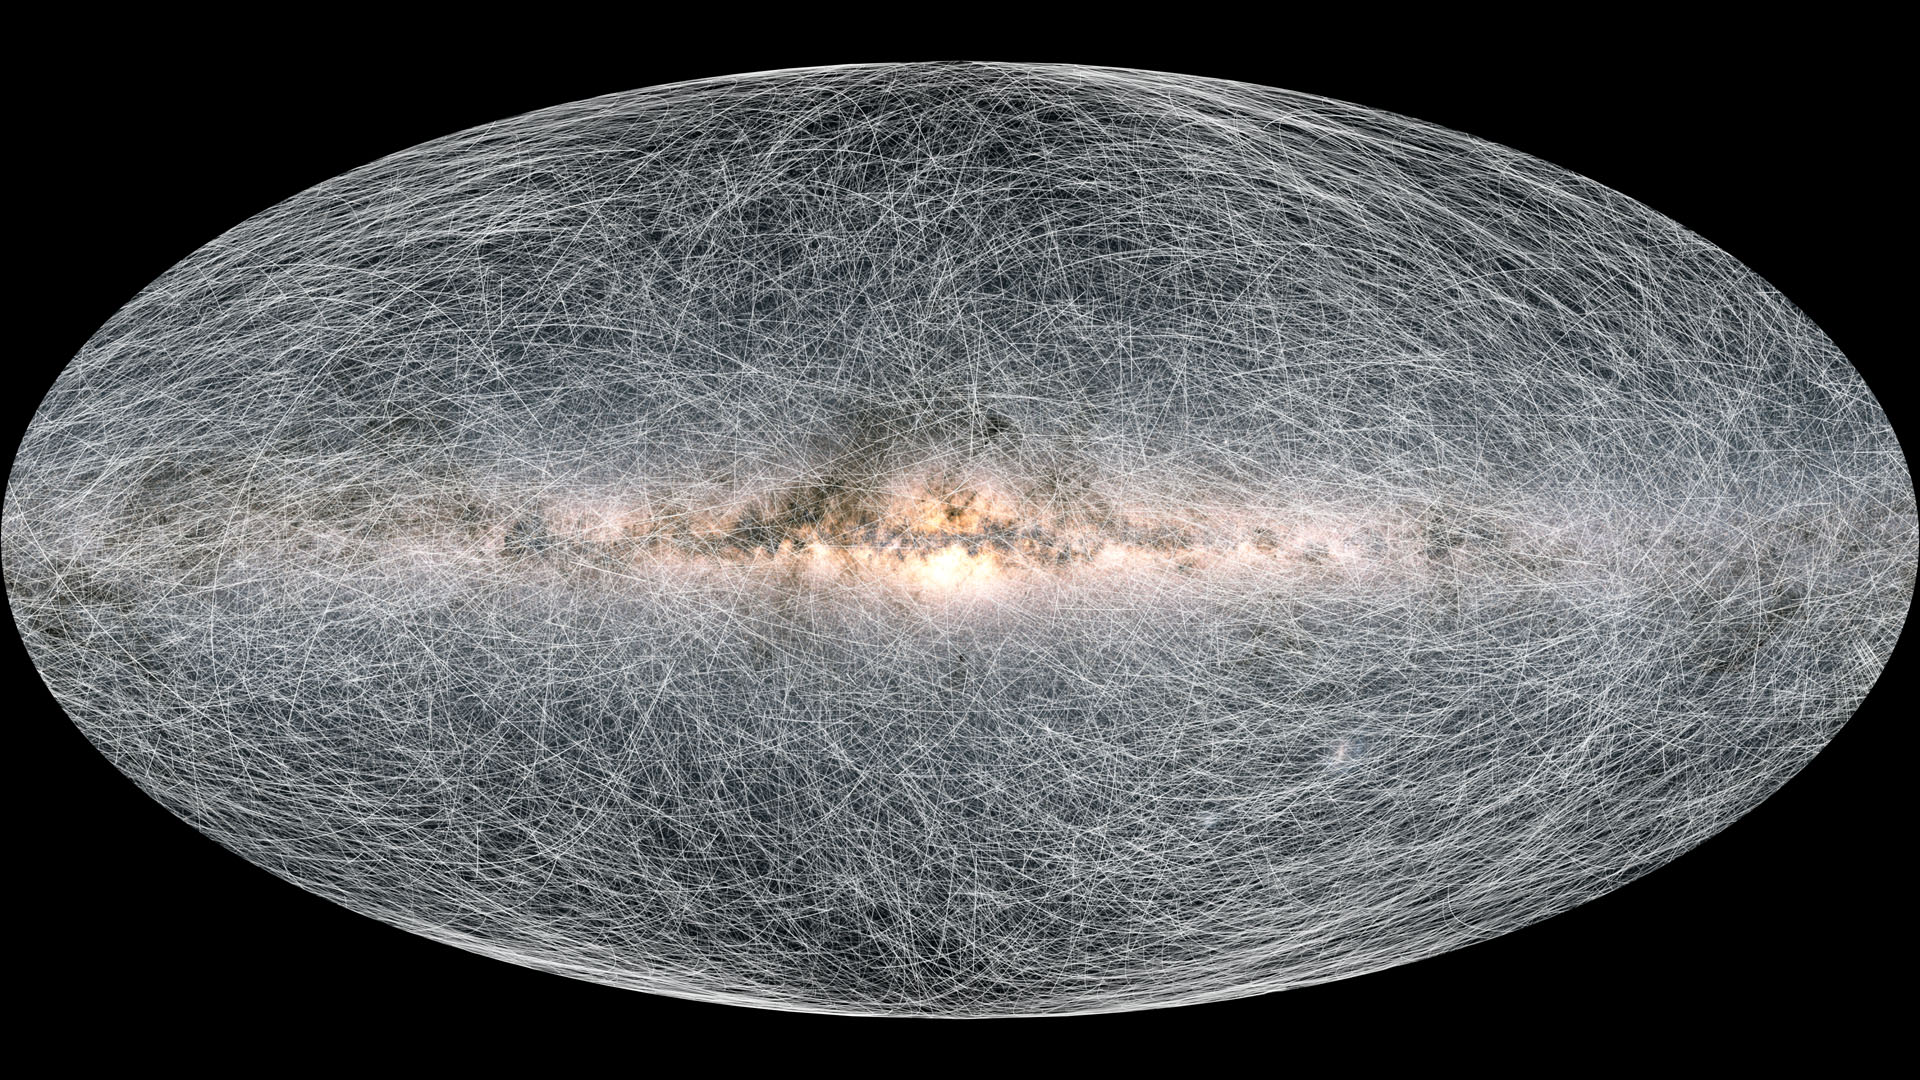 Scientists can predict the future motions of stars in the Milky Way from Gaia data.